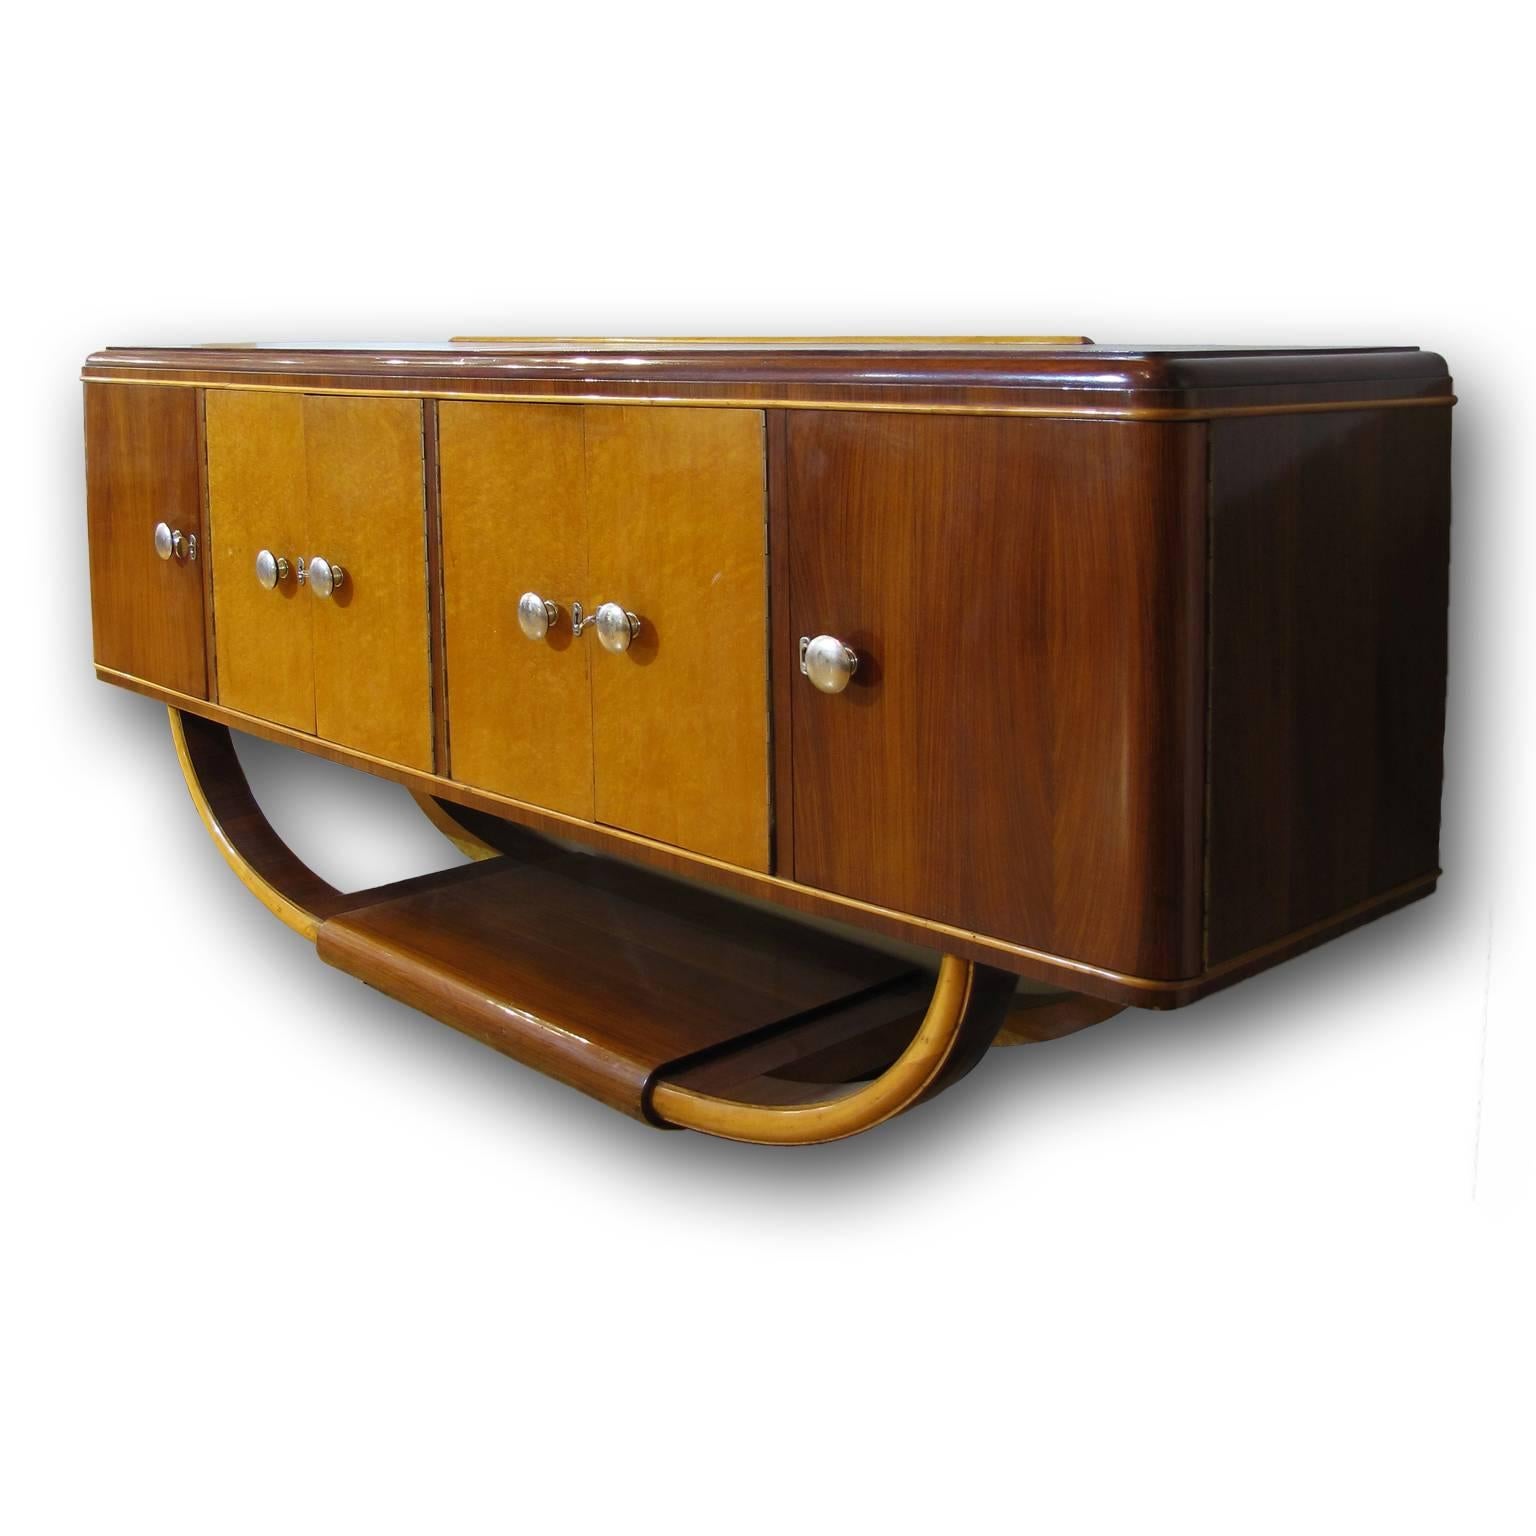 A spectacular Italian Art Deco four-door buffet or credenza in palisander with center doors in maple wood.
Simple hardware that complements the curved design.
 
 